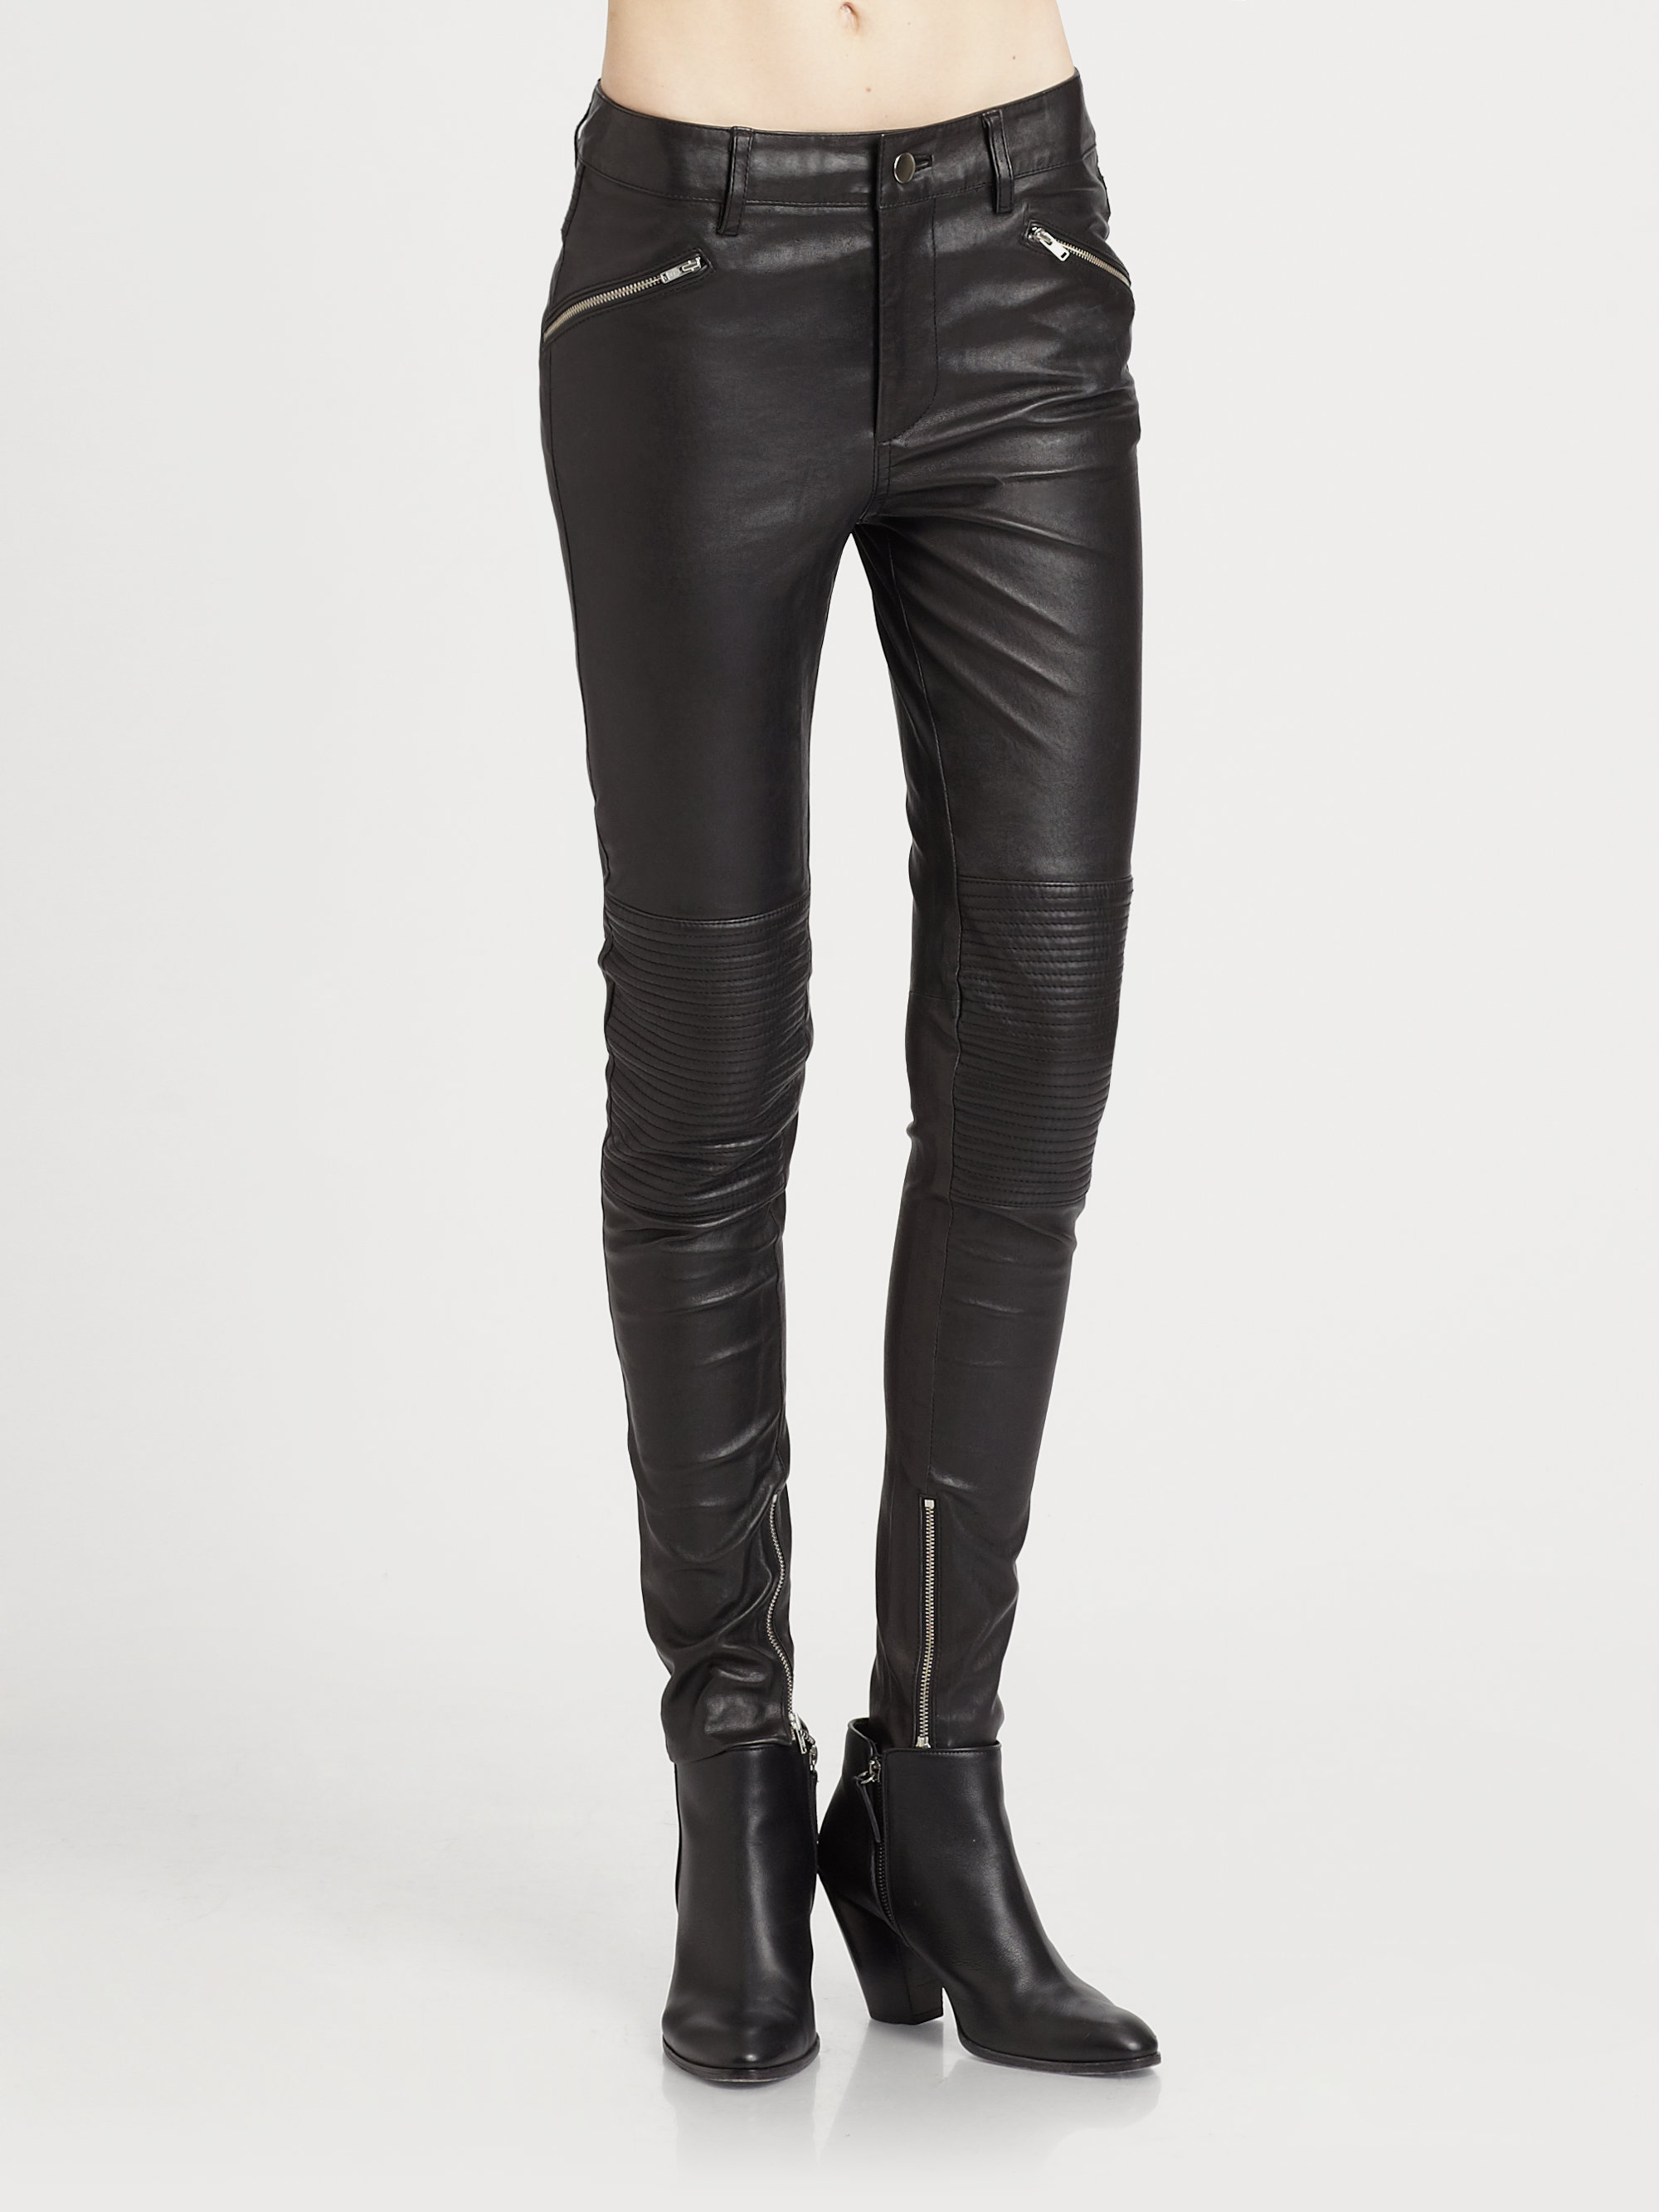 Lyst - Blk Dnm Stretch Leather Pants in Black